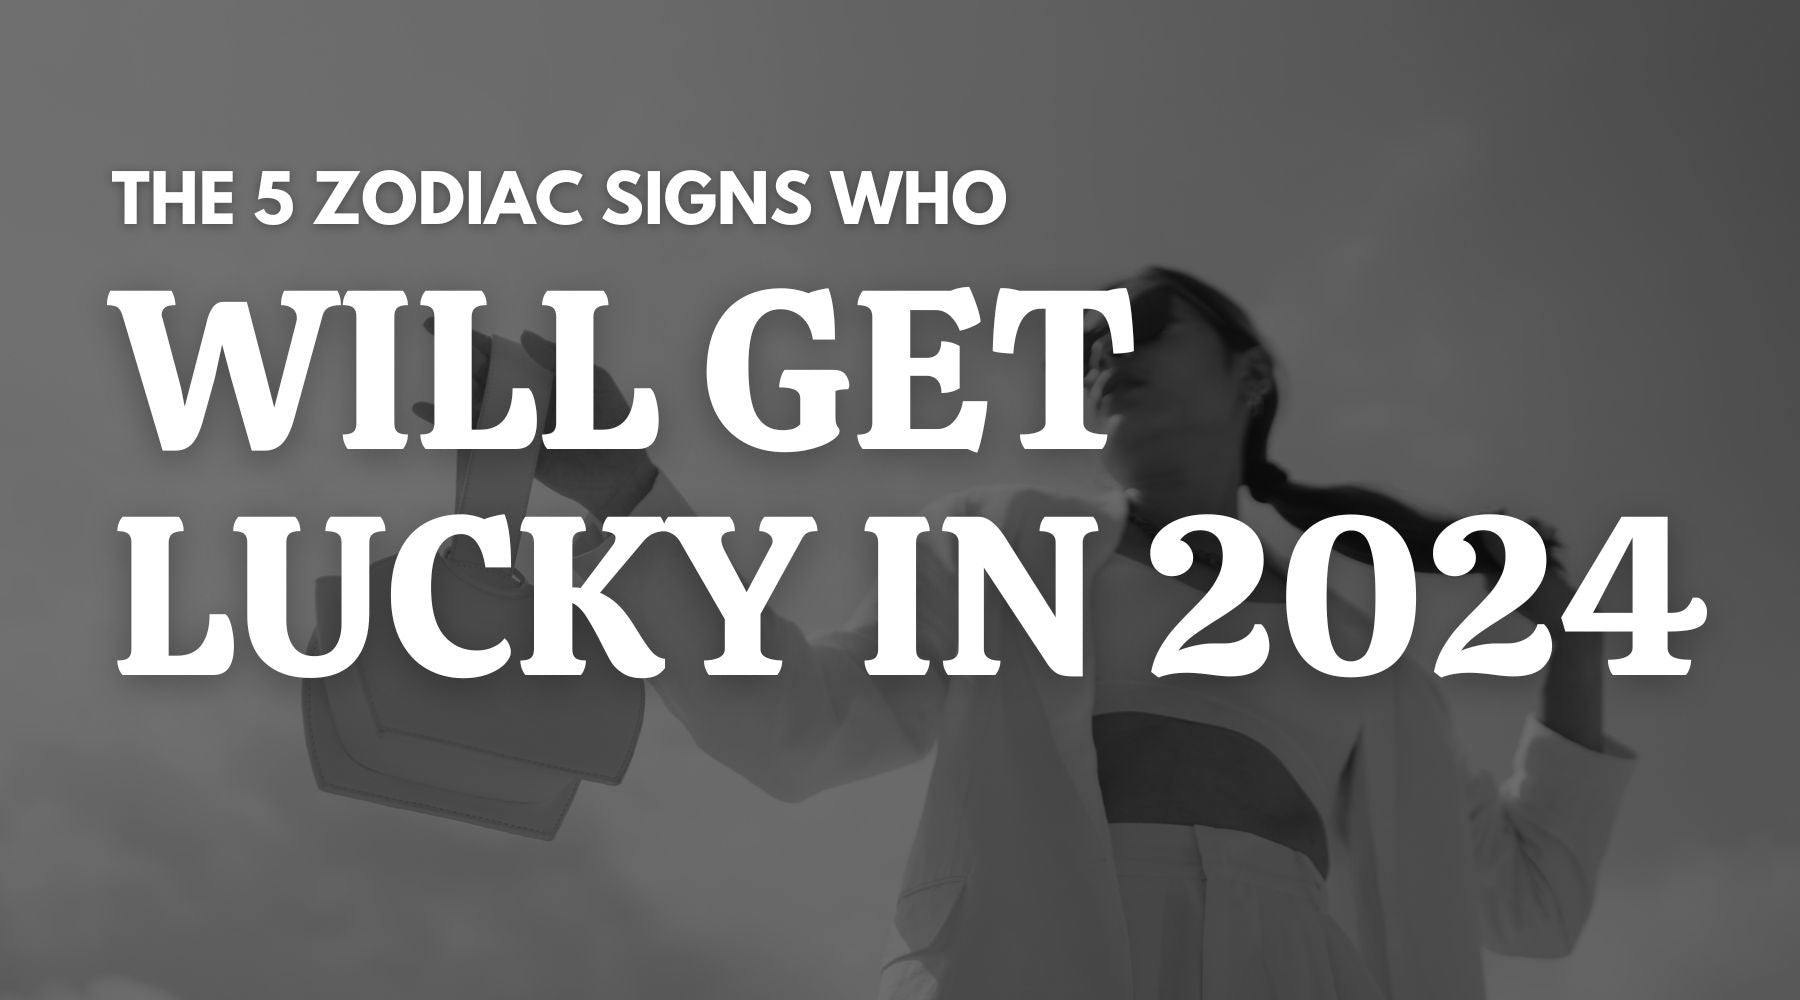 The 5 zodiac signs, who will get lucky in 2024 journalstogive